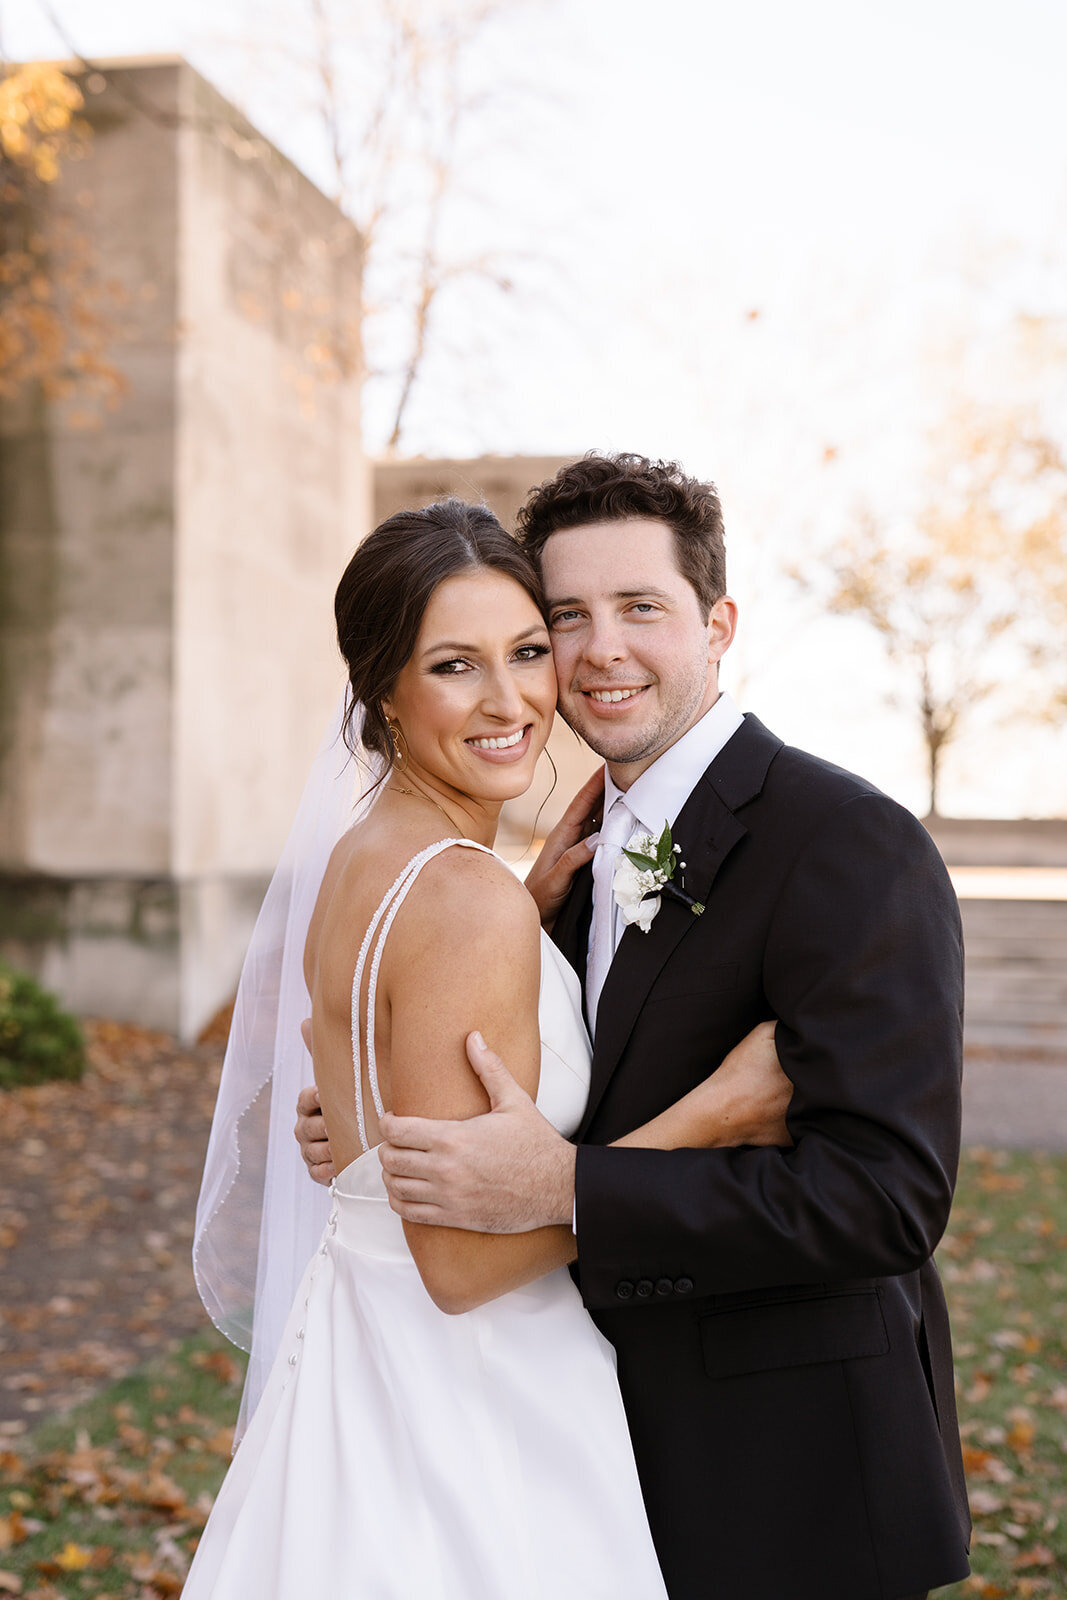 Kylie and Jack at The Grand Hall - Kansas City Wedding Photograpy - Nick and Lexie Photo Film-462